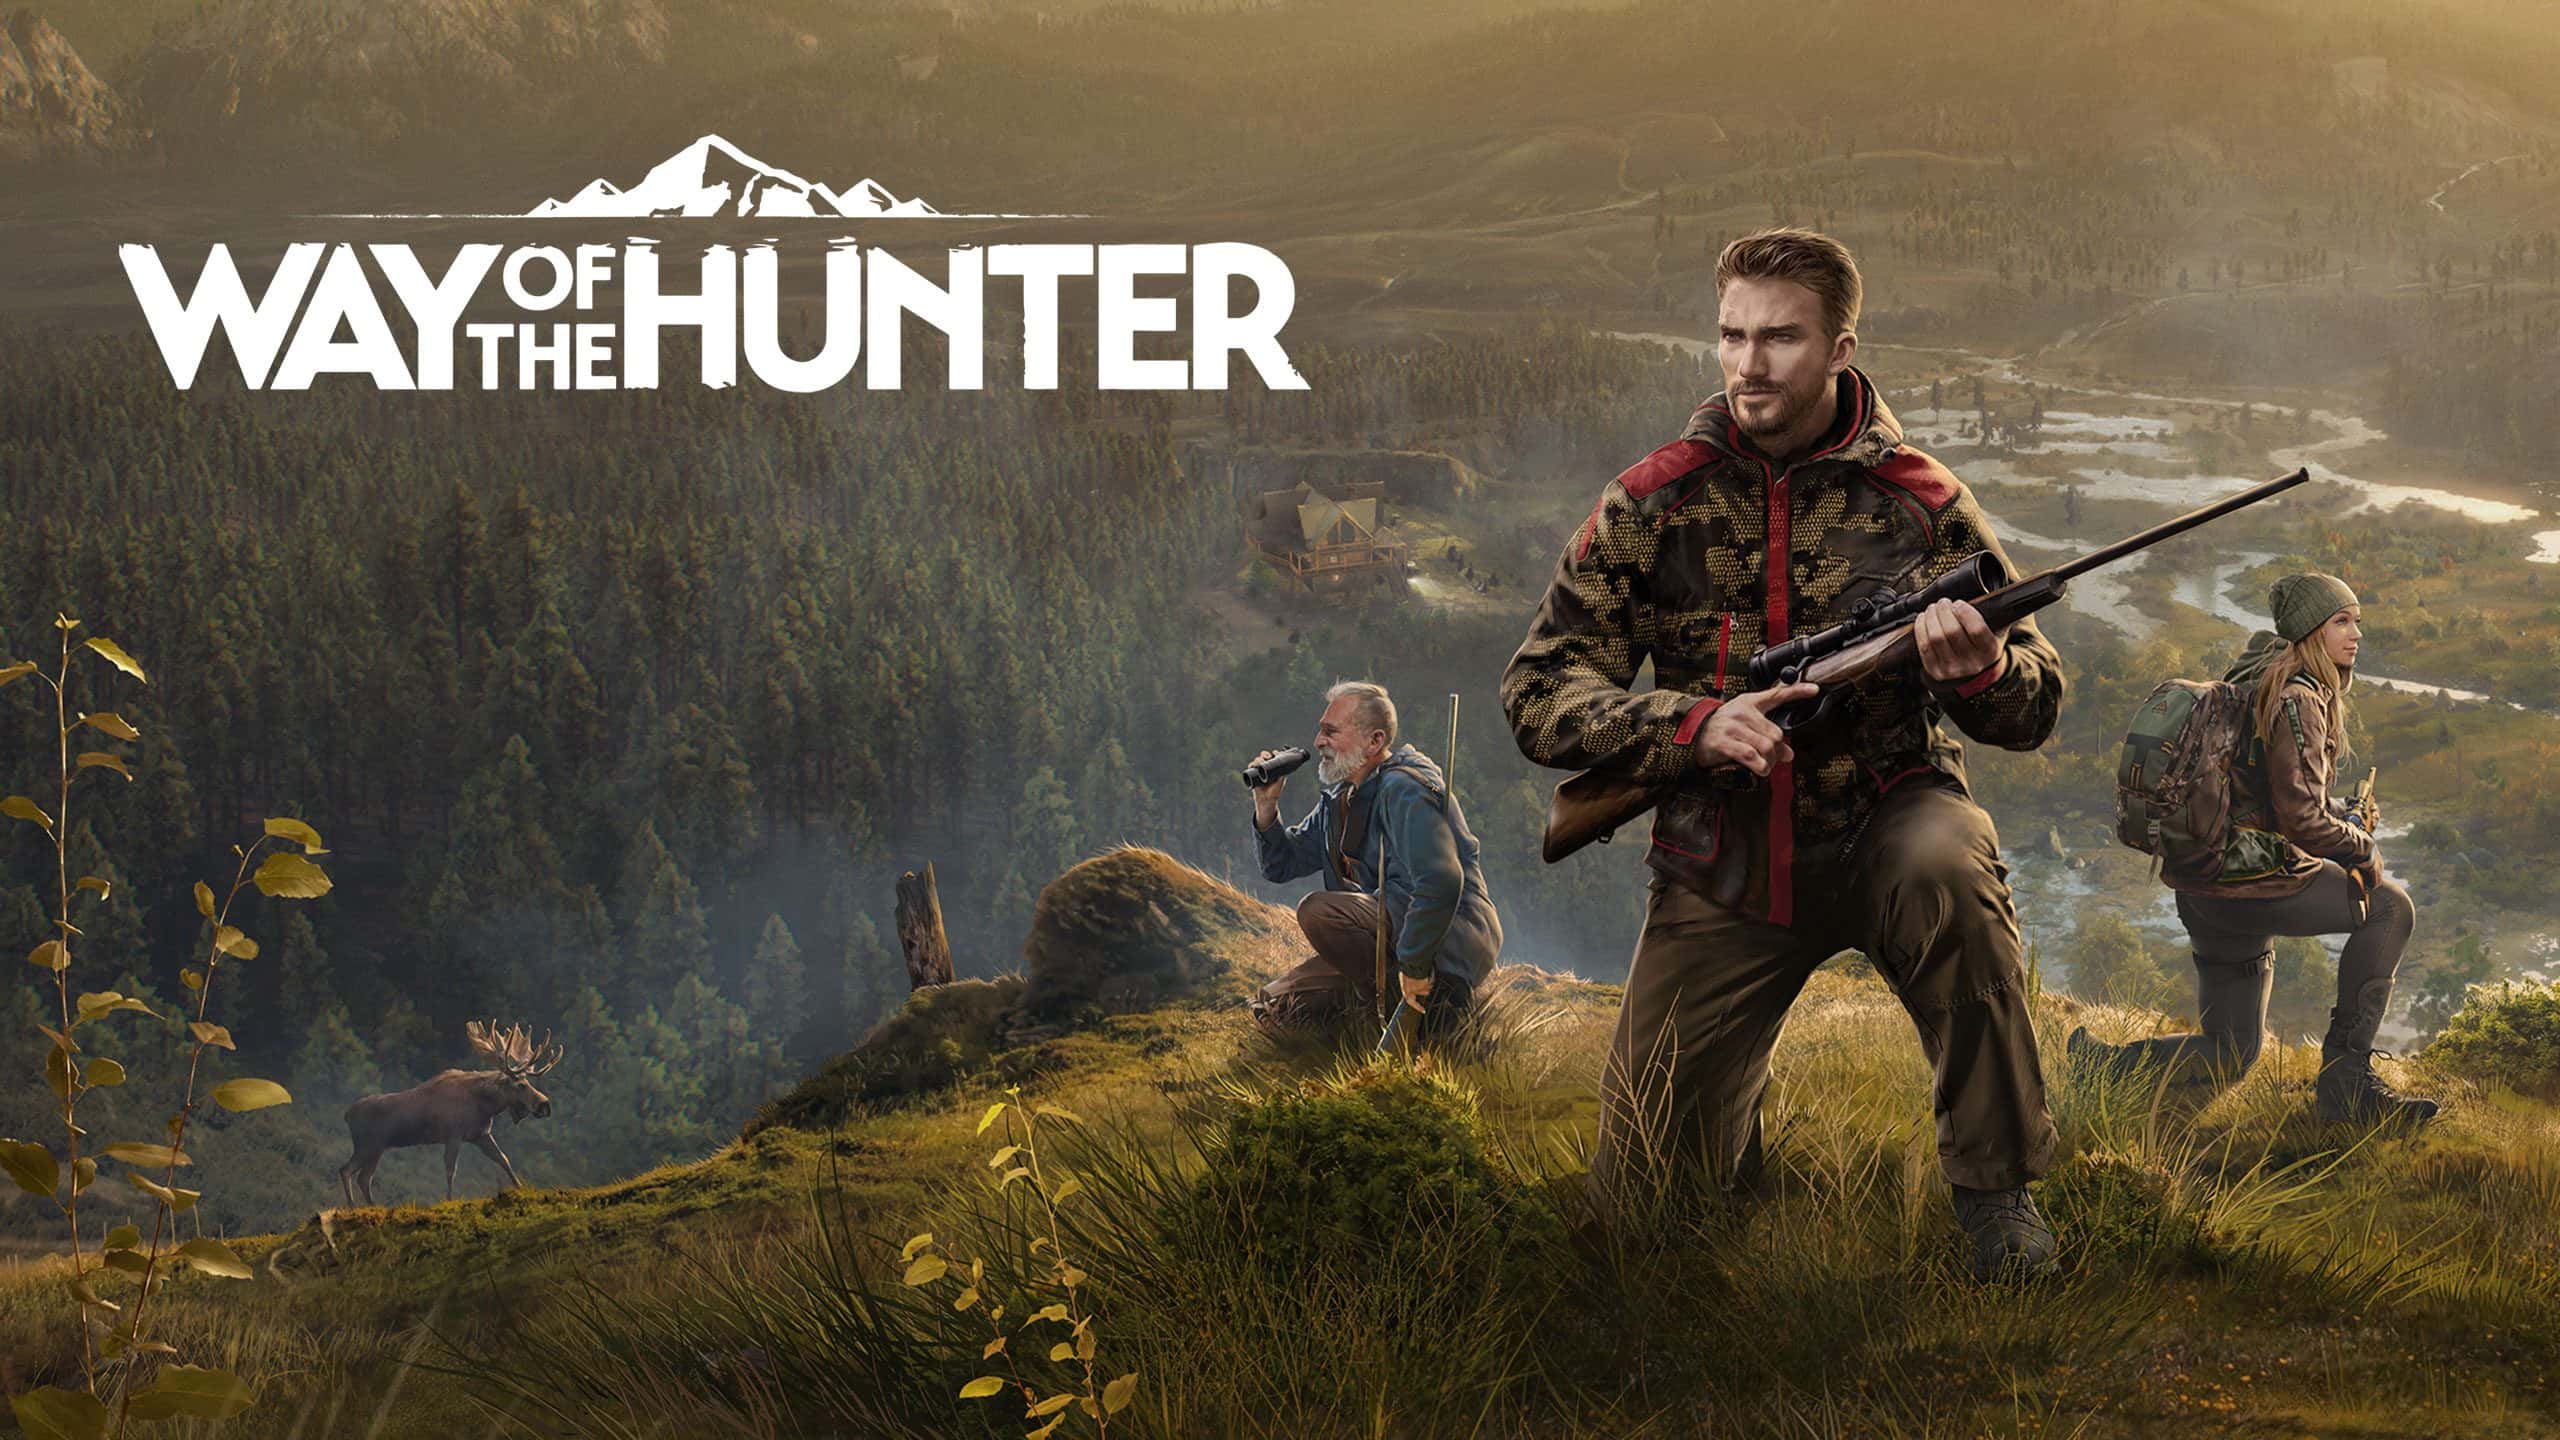 Way of the Hunter game poster